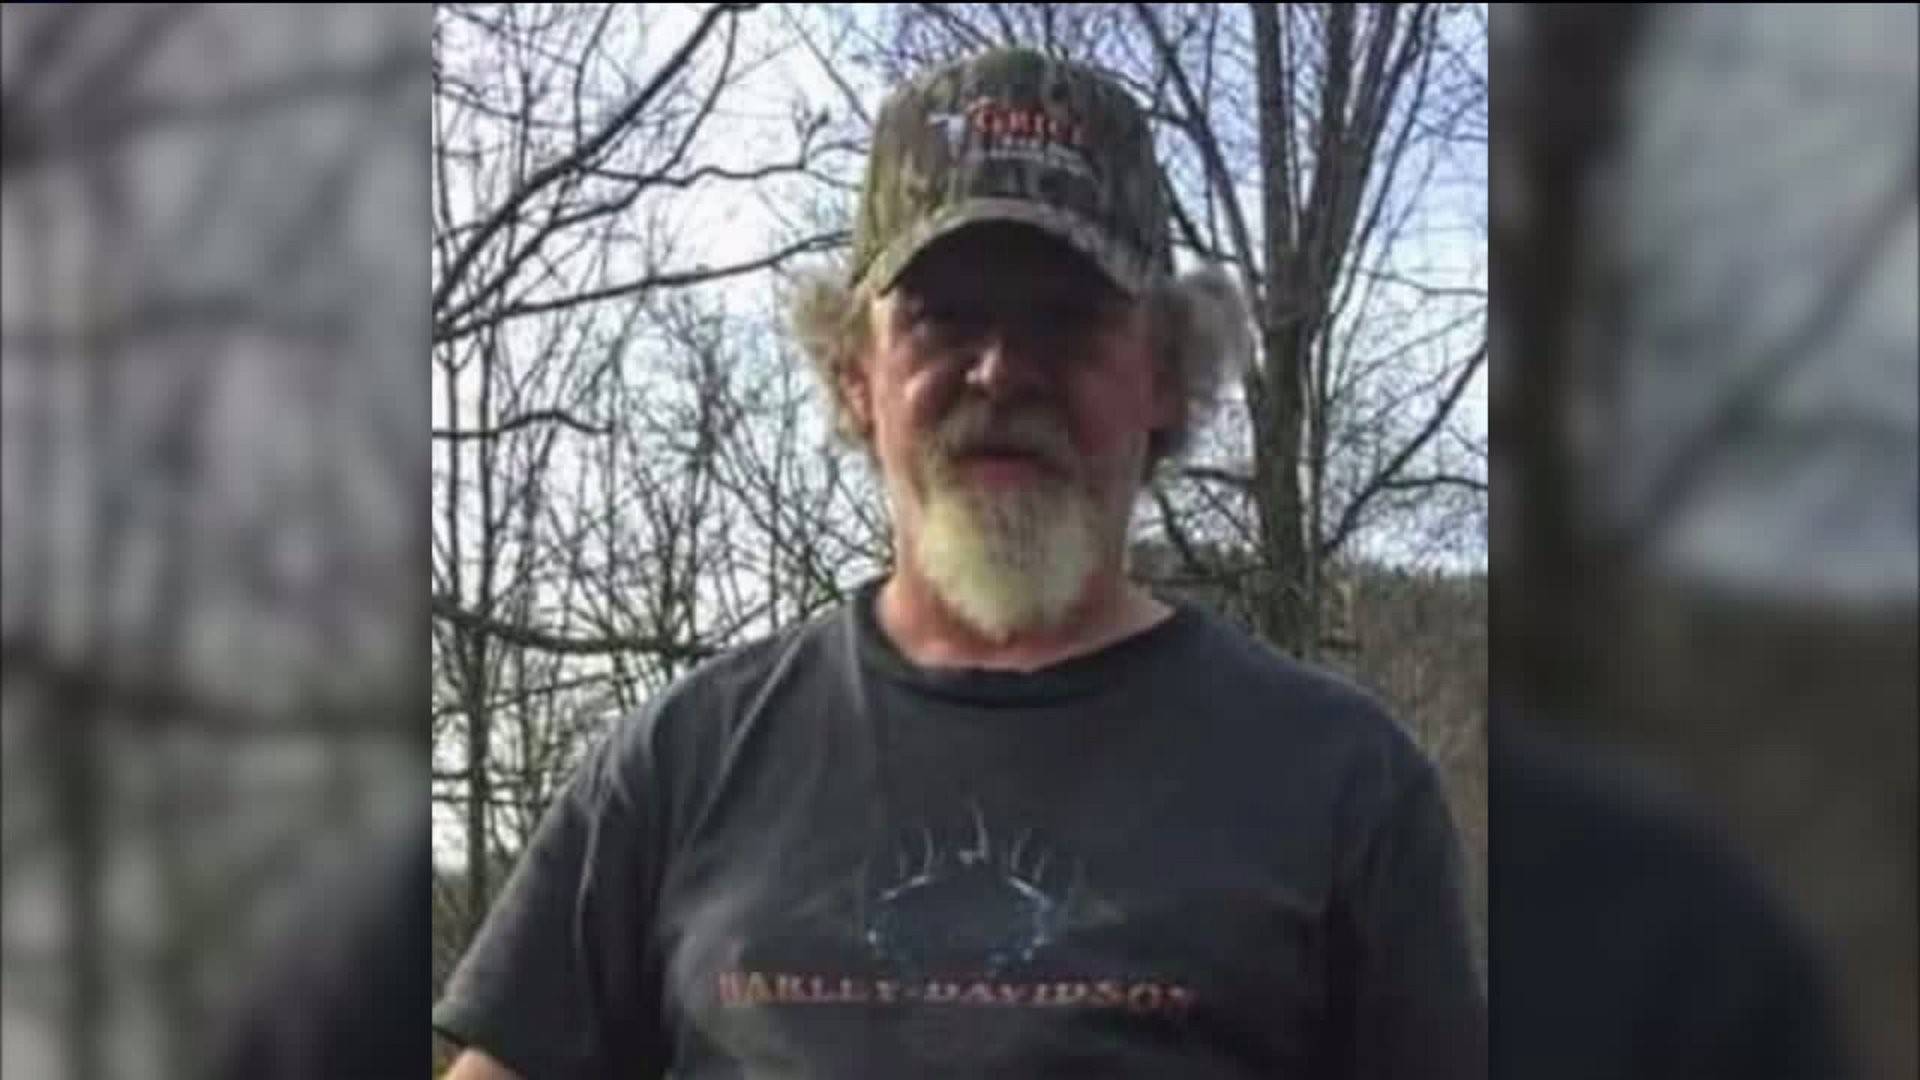 Search for Alleged Killer in Clinton County